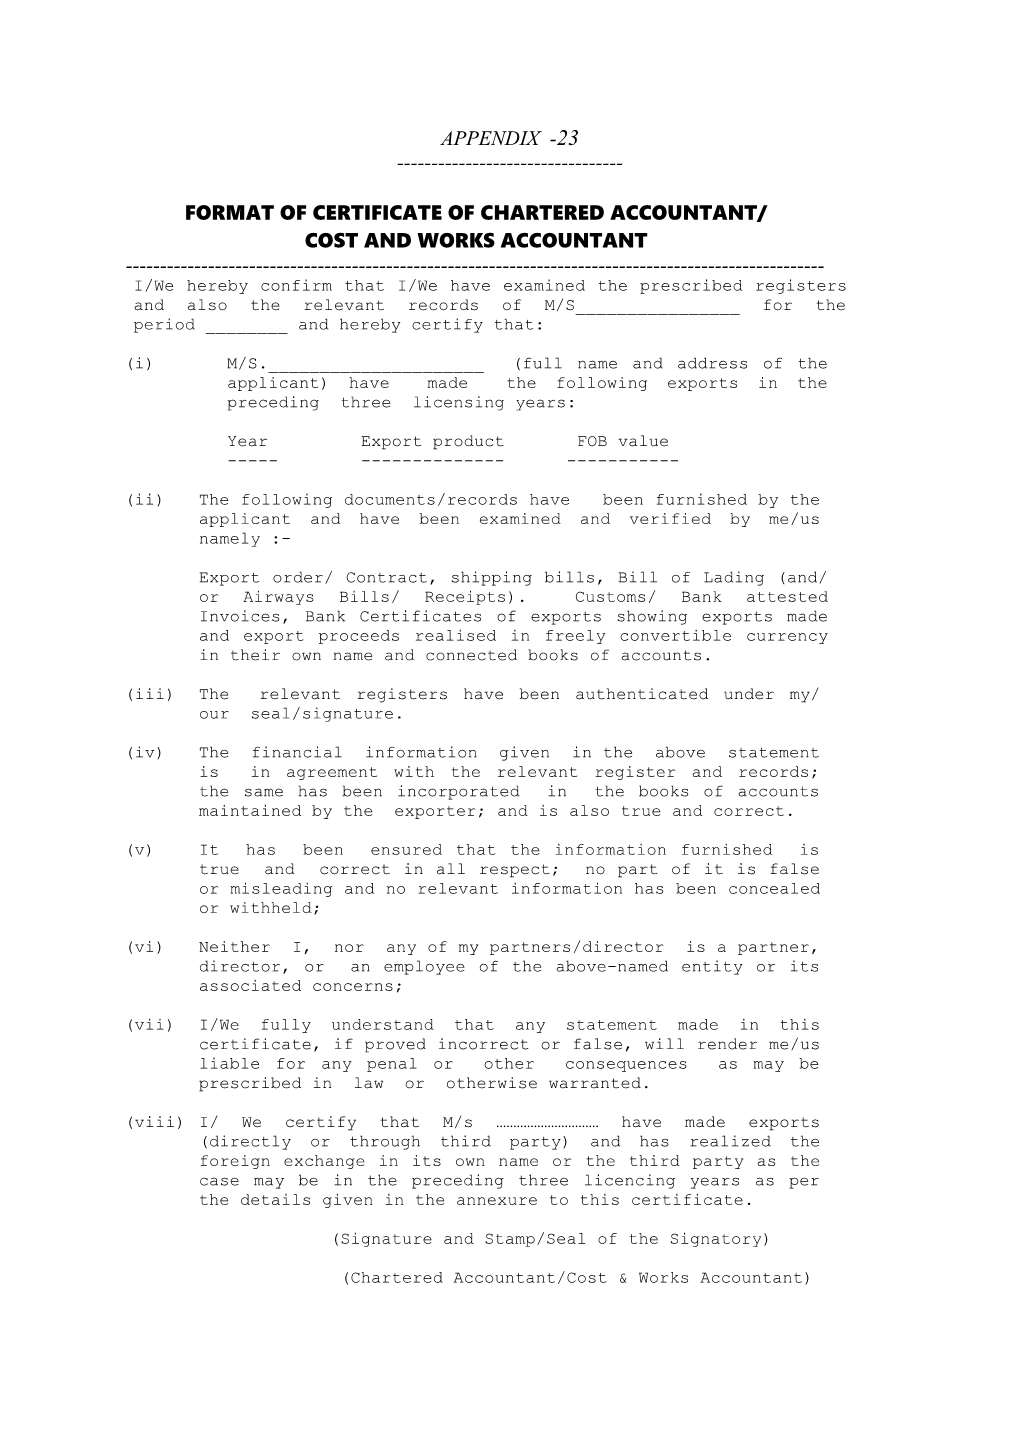 Format of Certificate of Chartered Accountant